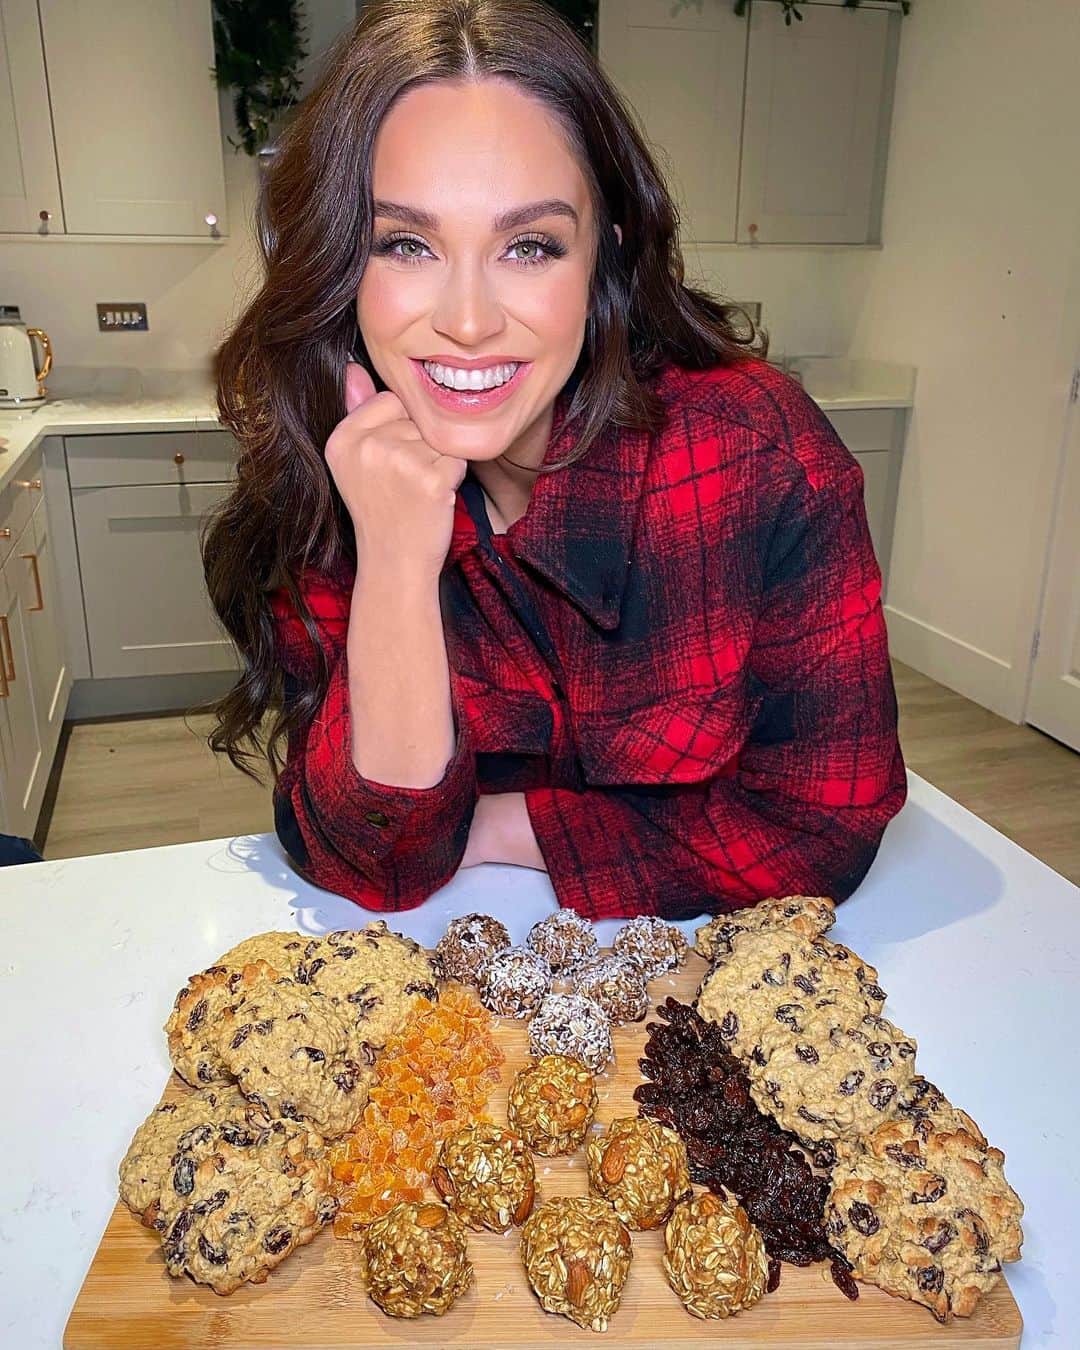 ヴィッキー・パティソンさんのインスタグラム写真 - (ヴィッキー・パティソンInstagram)「Ooh she’s back in the kitchen & having a ball! (An energy ball that is! 😂🤦🏻‍♀️ sorry about that, not my best work 😂😩)   So I haven’t been particularly disciplined with myself for quite a while, through one thing or another & now that I’m feeling a bit better I’m done making excuses & want to make some small changes, that when done consistently will garner good results! I want to feel healthy & happy again 😍   So I’m starting by upping my daily intake of dried fruit! Super simple & really easy to do but also has a whole heap of great benefits for your body!    It’s scary to learn that 73% of adults aren’t getting their standard 5 a day - now just 30g of dried fruit equals one of your five a day & it couldn’t be easier to incorporate them into your daily diet.. grab a handful of apricots as a snack, chuck some figs in a salad (ooohhh with a bit of feta maybe?! 😍) or pop some raisins in your porridge! The possibilities are endless! And once you’ve found something that works for you - you can kick back & start reaping the rewards.. Dried fruit is packed full of nutrients & are also a great source of fibre, iron & copper- & who doesn’t want more of those? 😂😍   So in support of the Dried Fruit Alliance’s #EatMoreDriedFruit campaign I got in the kitchen & whipped up some lovely little snacks using some of my fave dried fruits! You’re looking at oatmeal & raisin cookies, date & almond energy balls & dark chocolate and coconut energy balls! They were all delicious if I do say so myself 😂 If you’re really on the health kick I’d suggest trying the energy balls, which are about 80-100kcals per ball & packed full of dried fruit, fibre & healthy fats! But if you are just looking to slowly wean yourself off the quality street & mince pies- why not try these oatmeal raisin cookies! They’re choc full of raisins & oats & are a major hit with the little ones- such a crafty way to get one of their 5 a day in them! 😂😍   So guys, I suggest we don’t be too hard on ourselves this Jan- last year was tough & lockdown is the worst- so instead be kind to yourself & make small changes to your diet which will make you feel loads happier & healthier ❤️ AD   #eatmoredriedfruit」1月26日 4時37分 - vickypattison